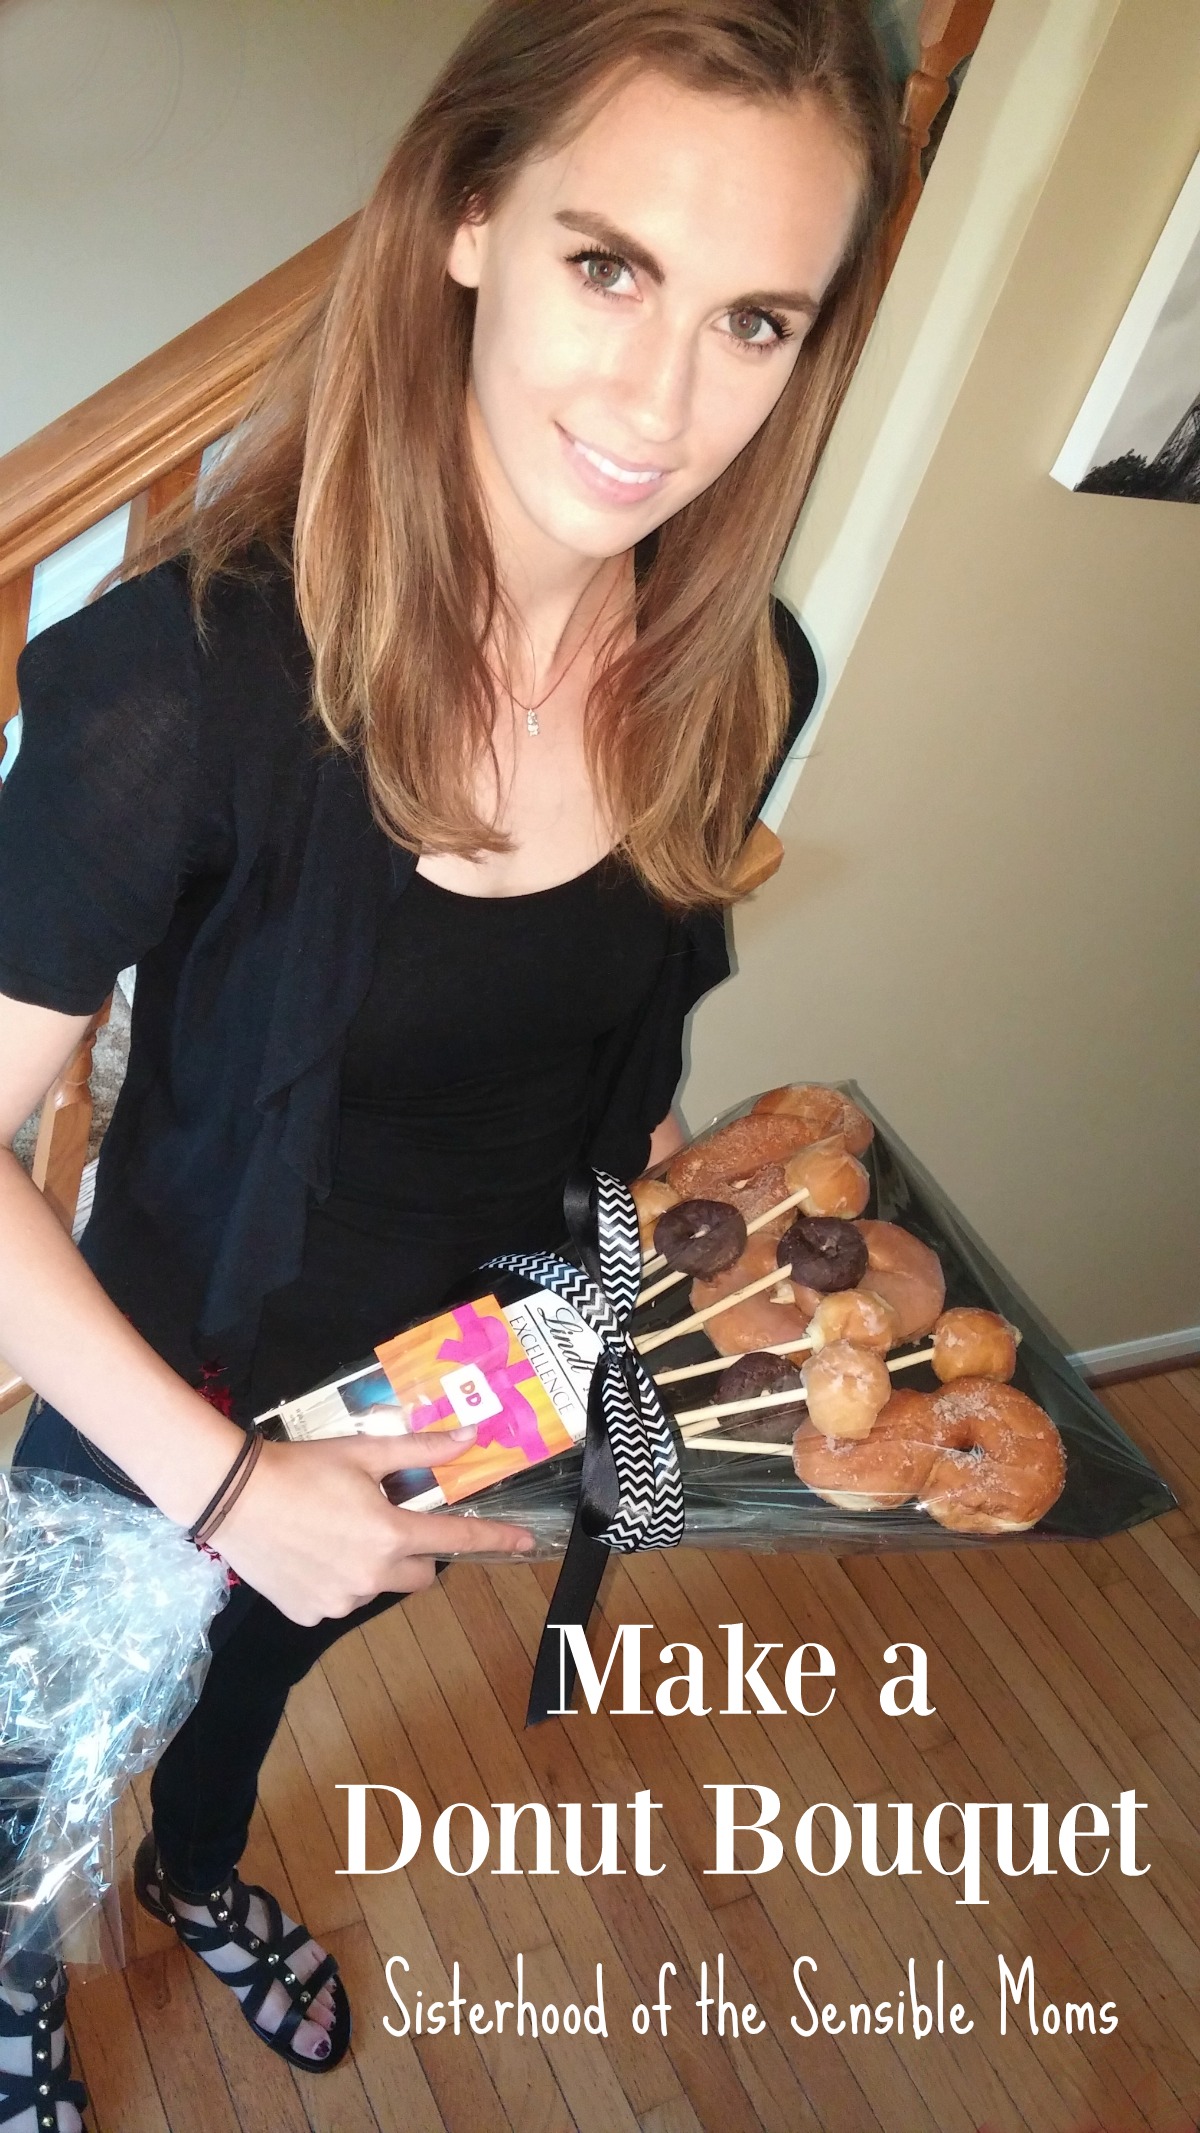 How to Make a Donut Bouquet (Tutorial). Deliciously perfect gift for National Donut Day or any occasion! Quick, easy, and impressive: everything a craft project should be. | Sisterhood of the Sensible Moms